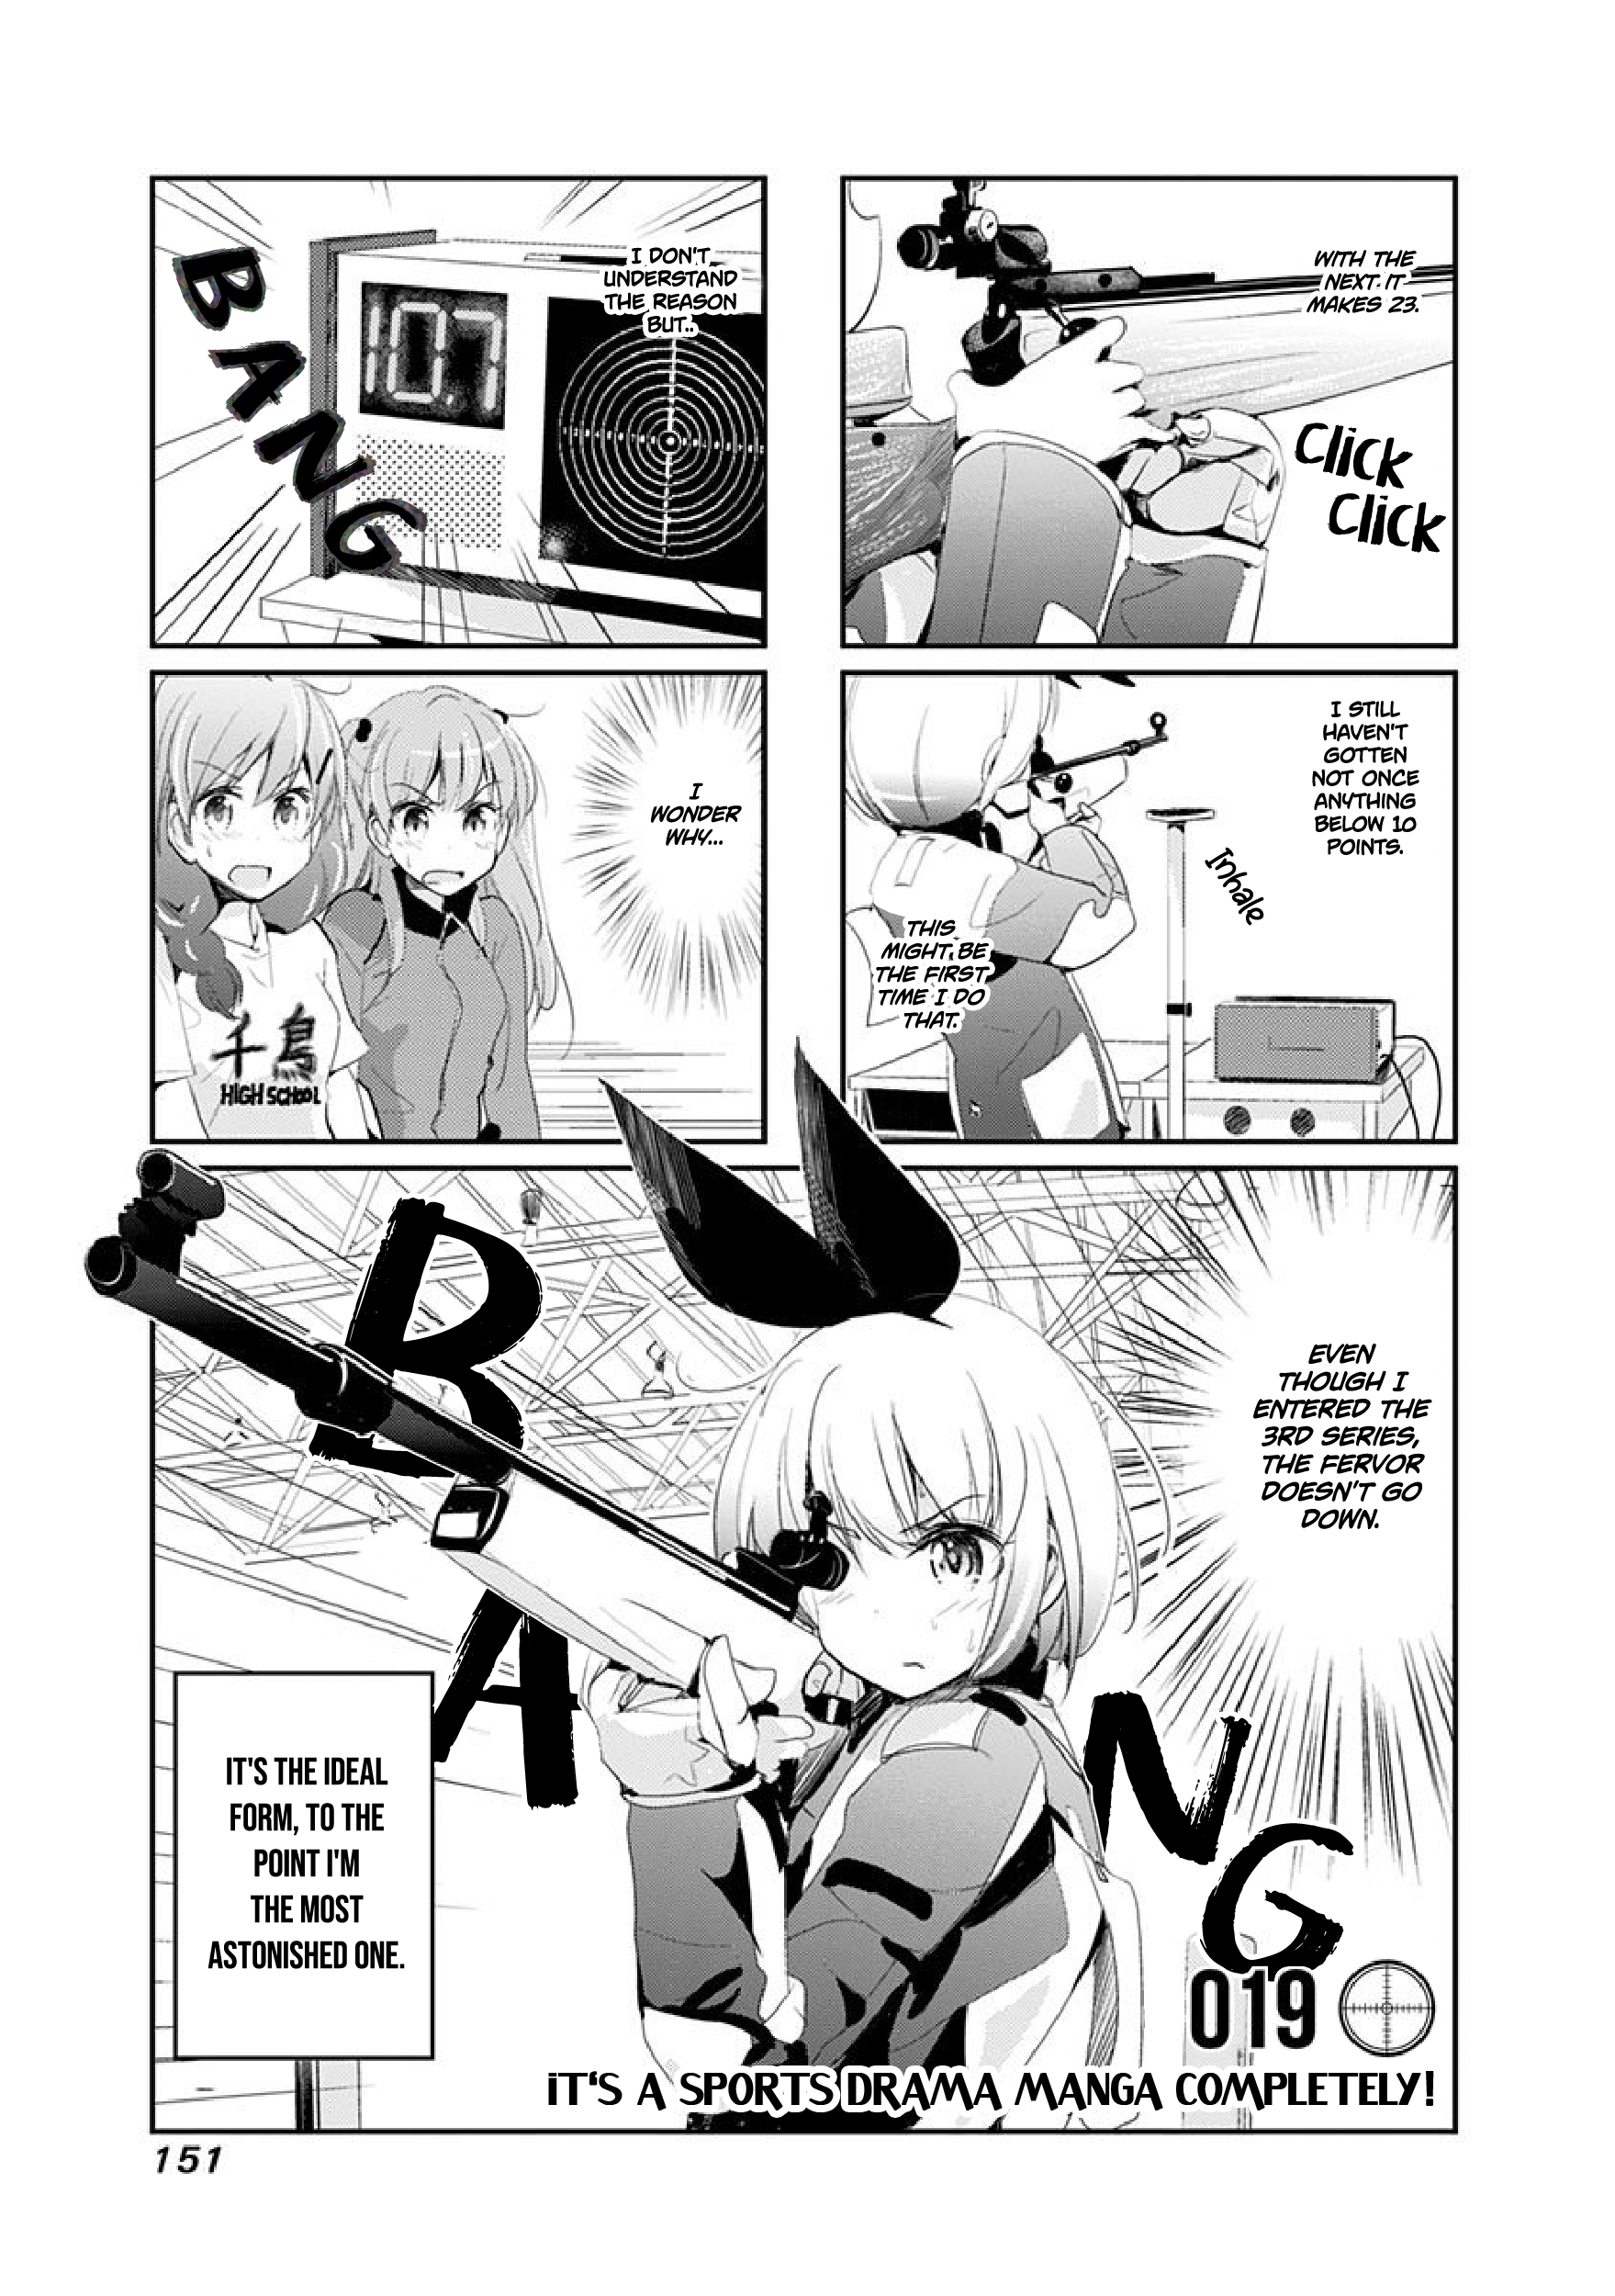 Rifle Is Beautiful Vol.1 Chapter 19: It's A Sports Drama Manga Completely! - Picture 2